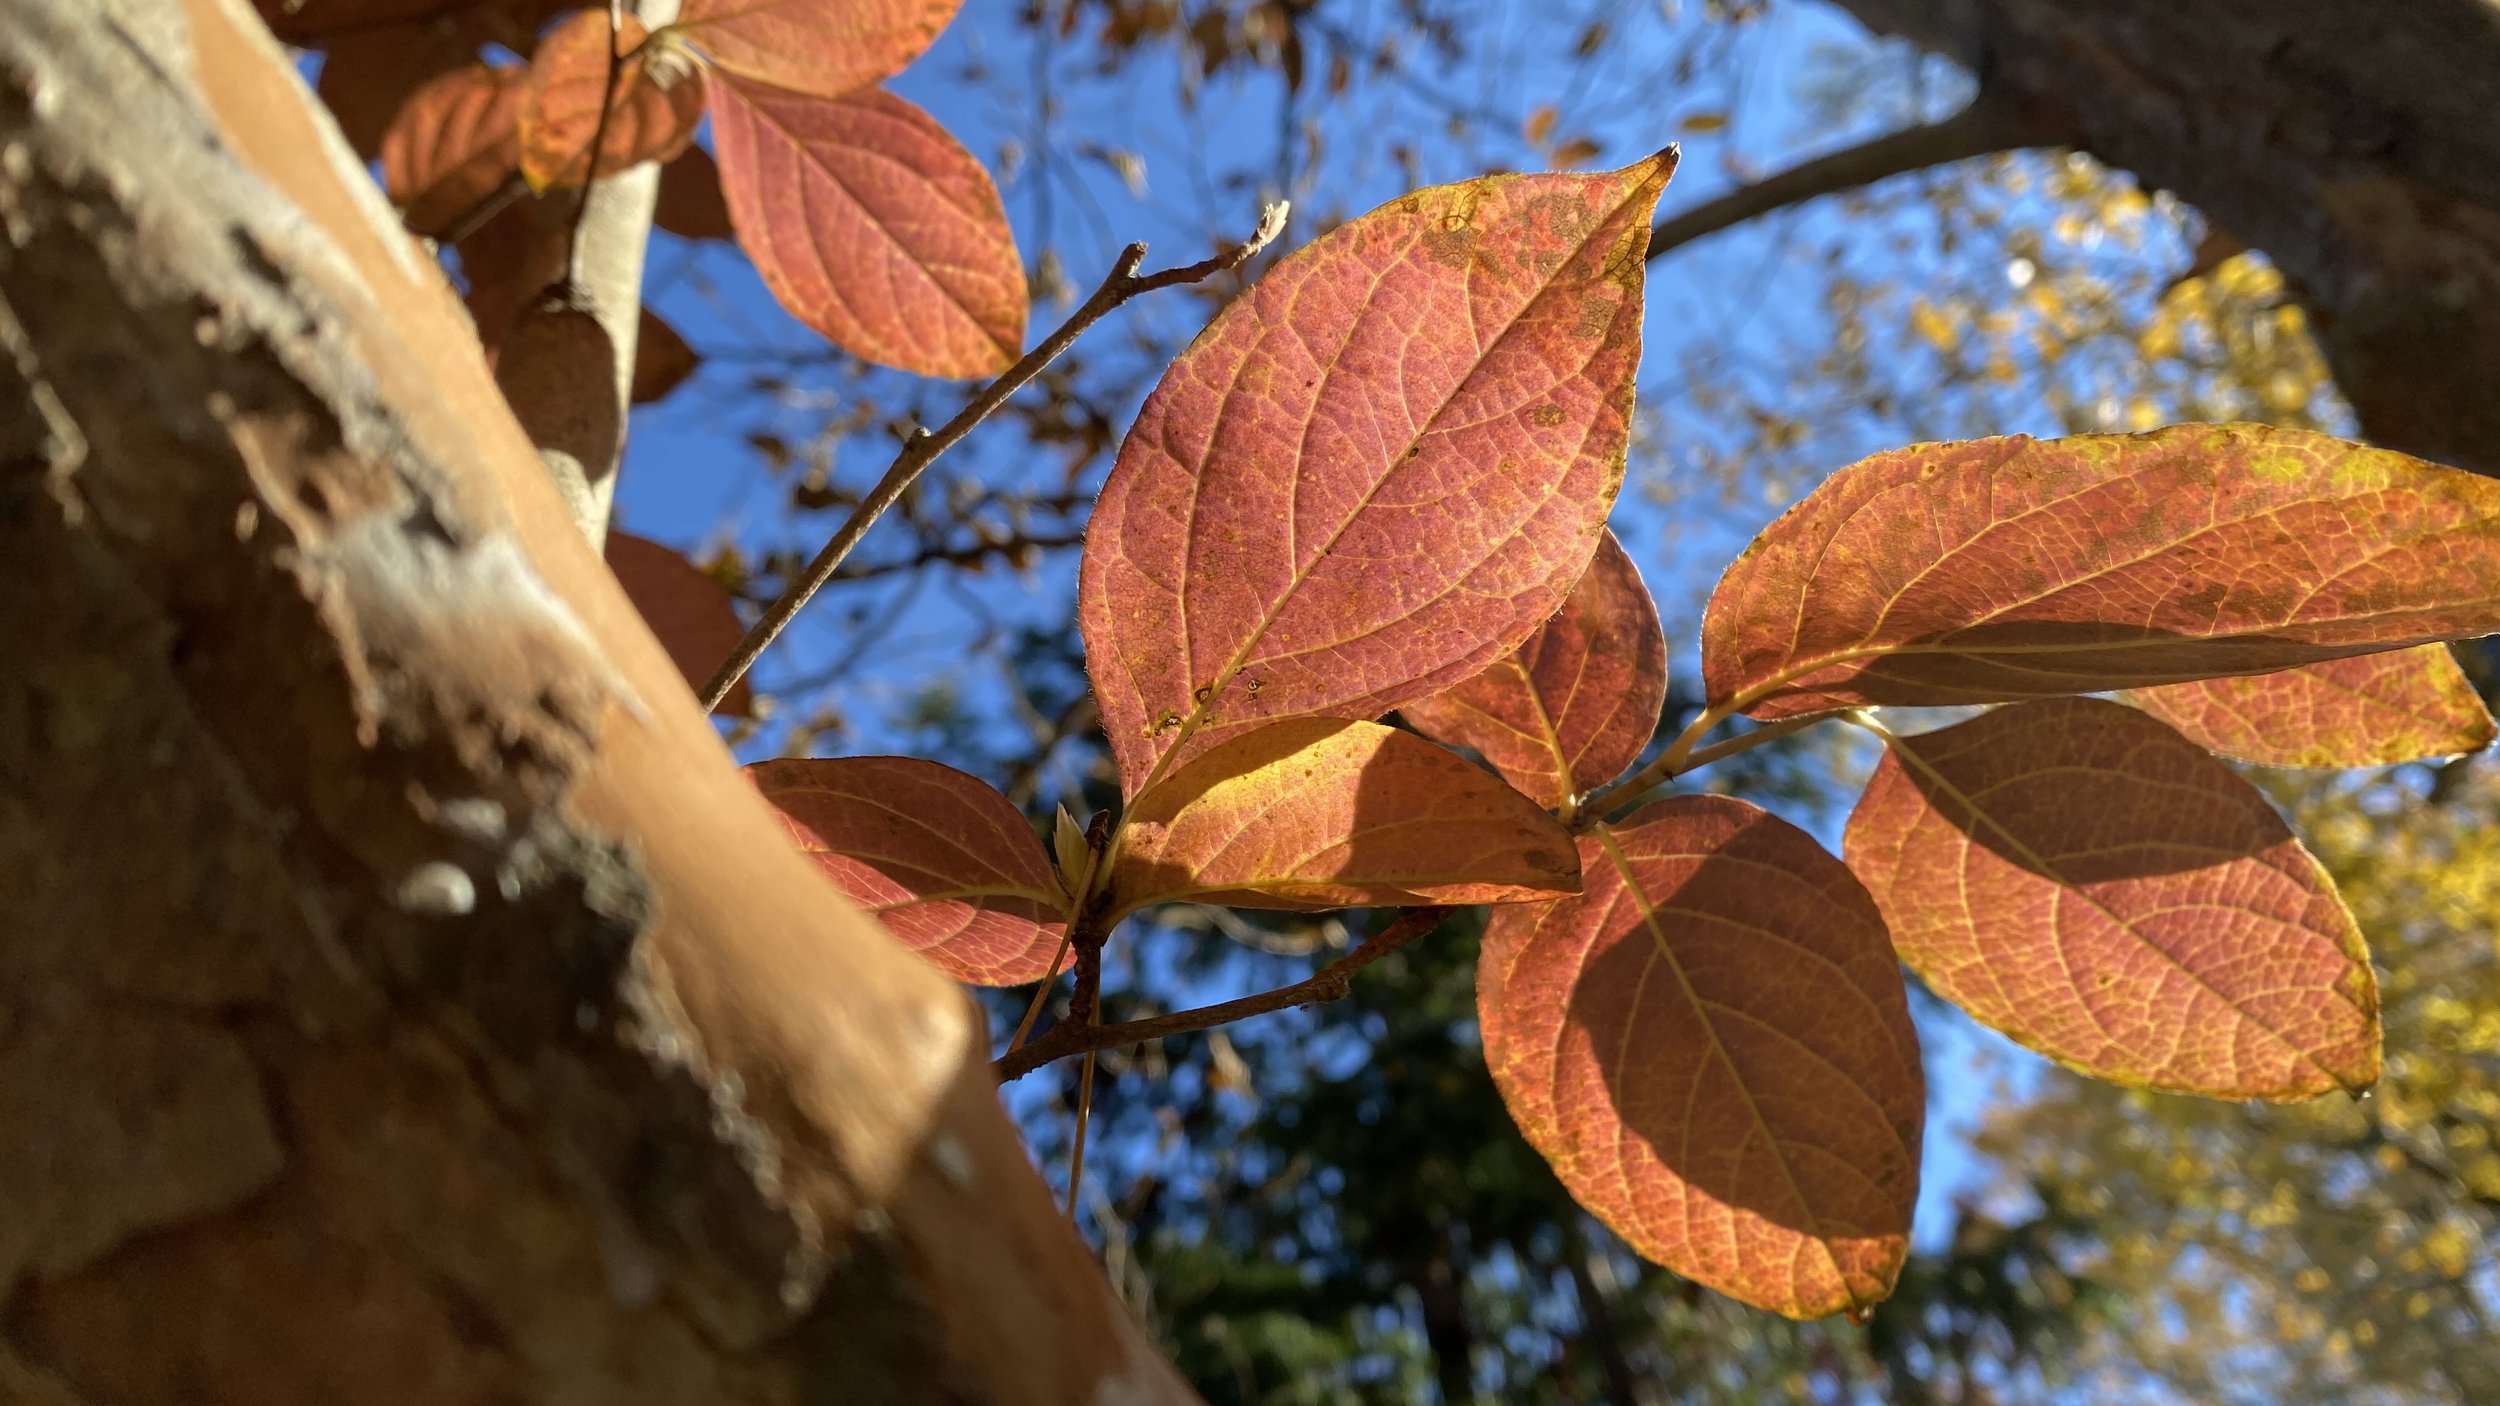  Only rarely have I seen such nice fall color on Elizabeth’s  Stewartia pseudocamellia  var.  koreana  (Japanese or Korean stewartia).  She remarked that it was rare for her to see nice fall color on this small tree as well… that usually the leaves w